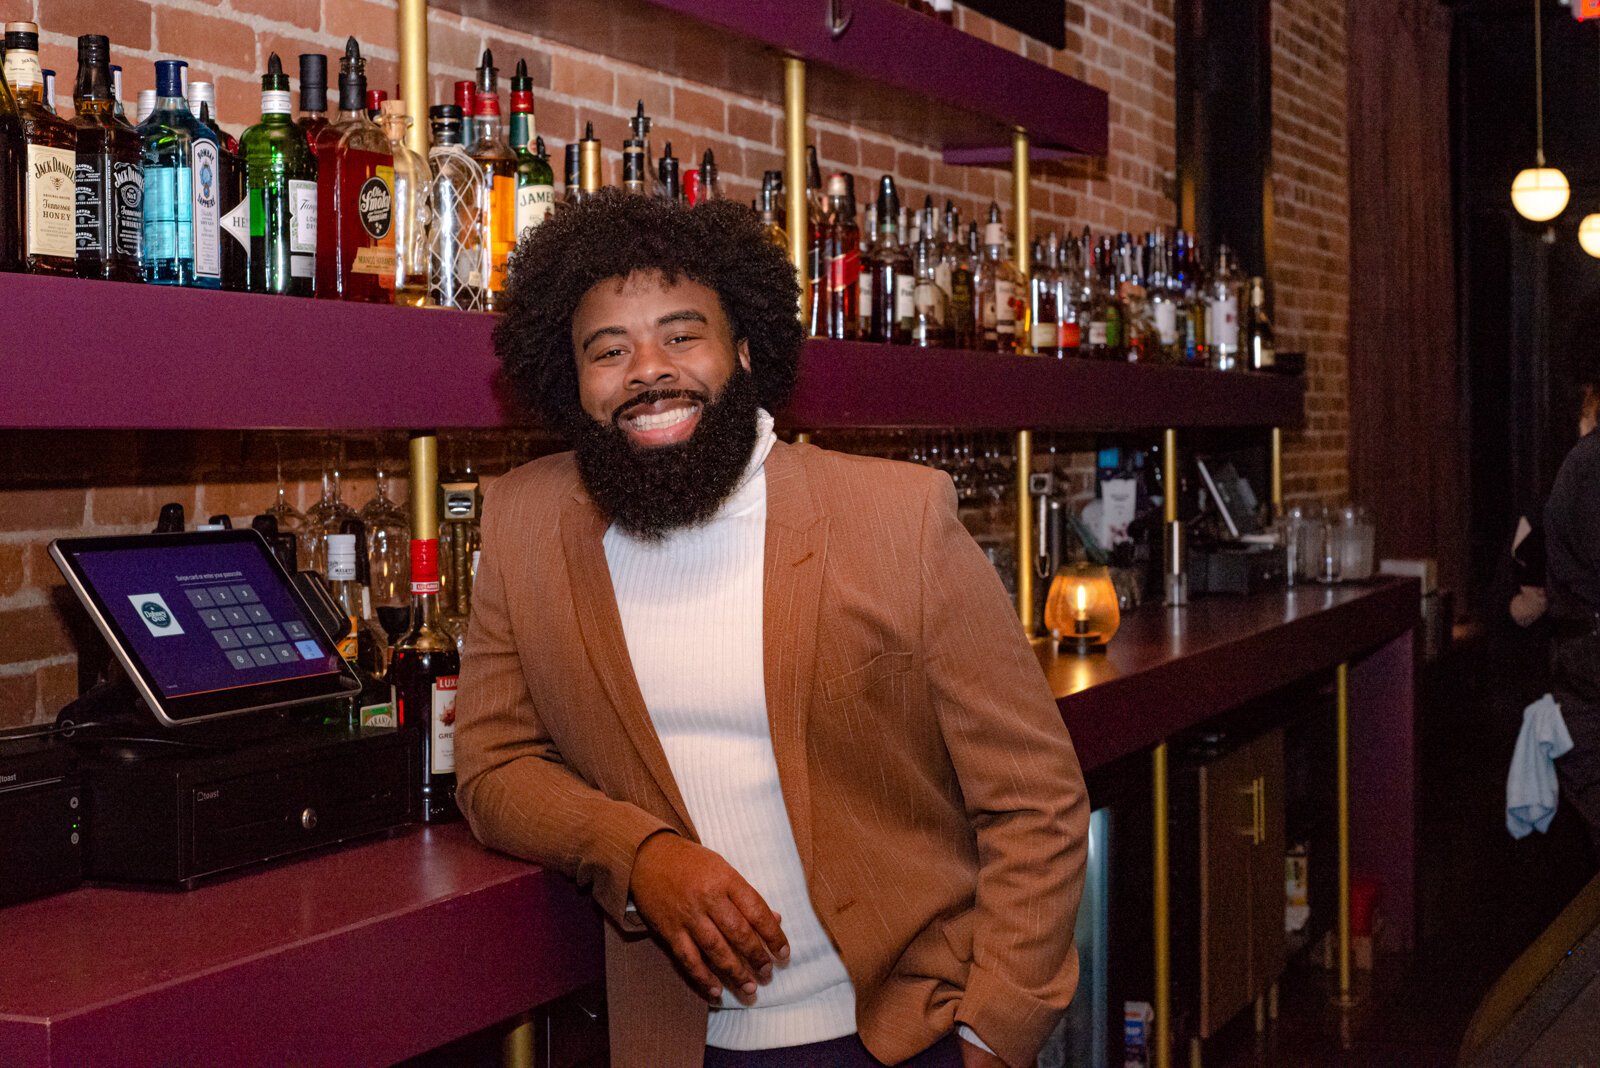 Dabney and Co. owner Daniel May wanted to create an atmosphere reflecting Black culture, but welcoming to all.